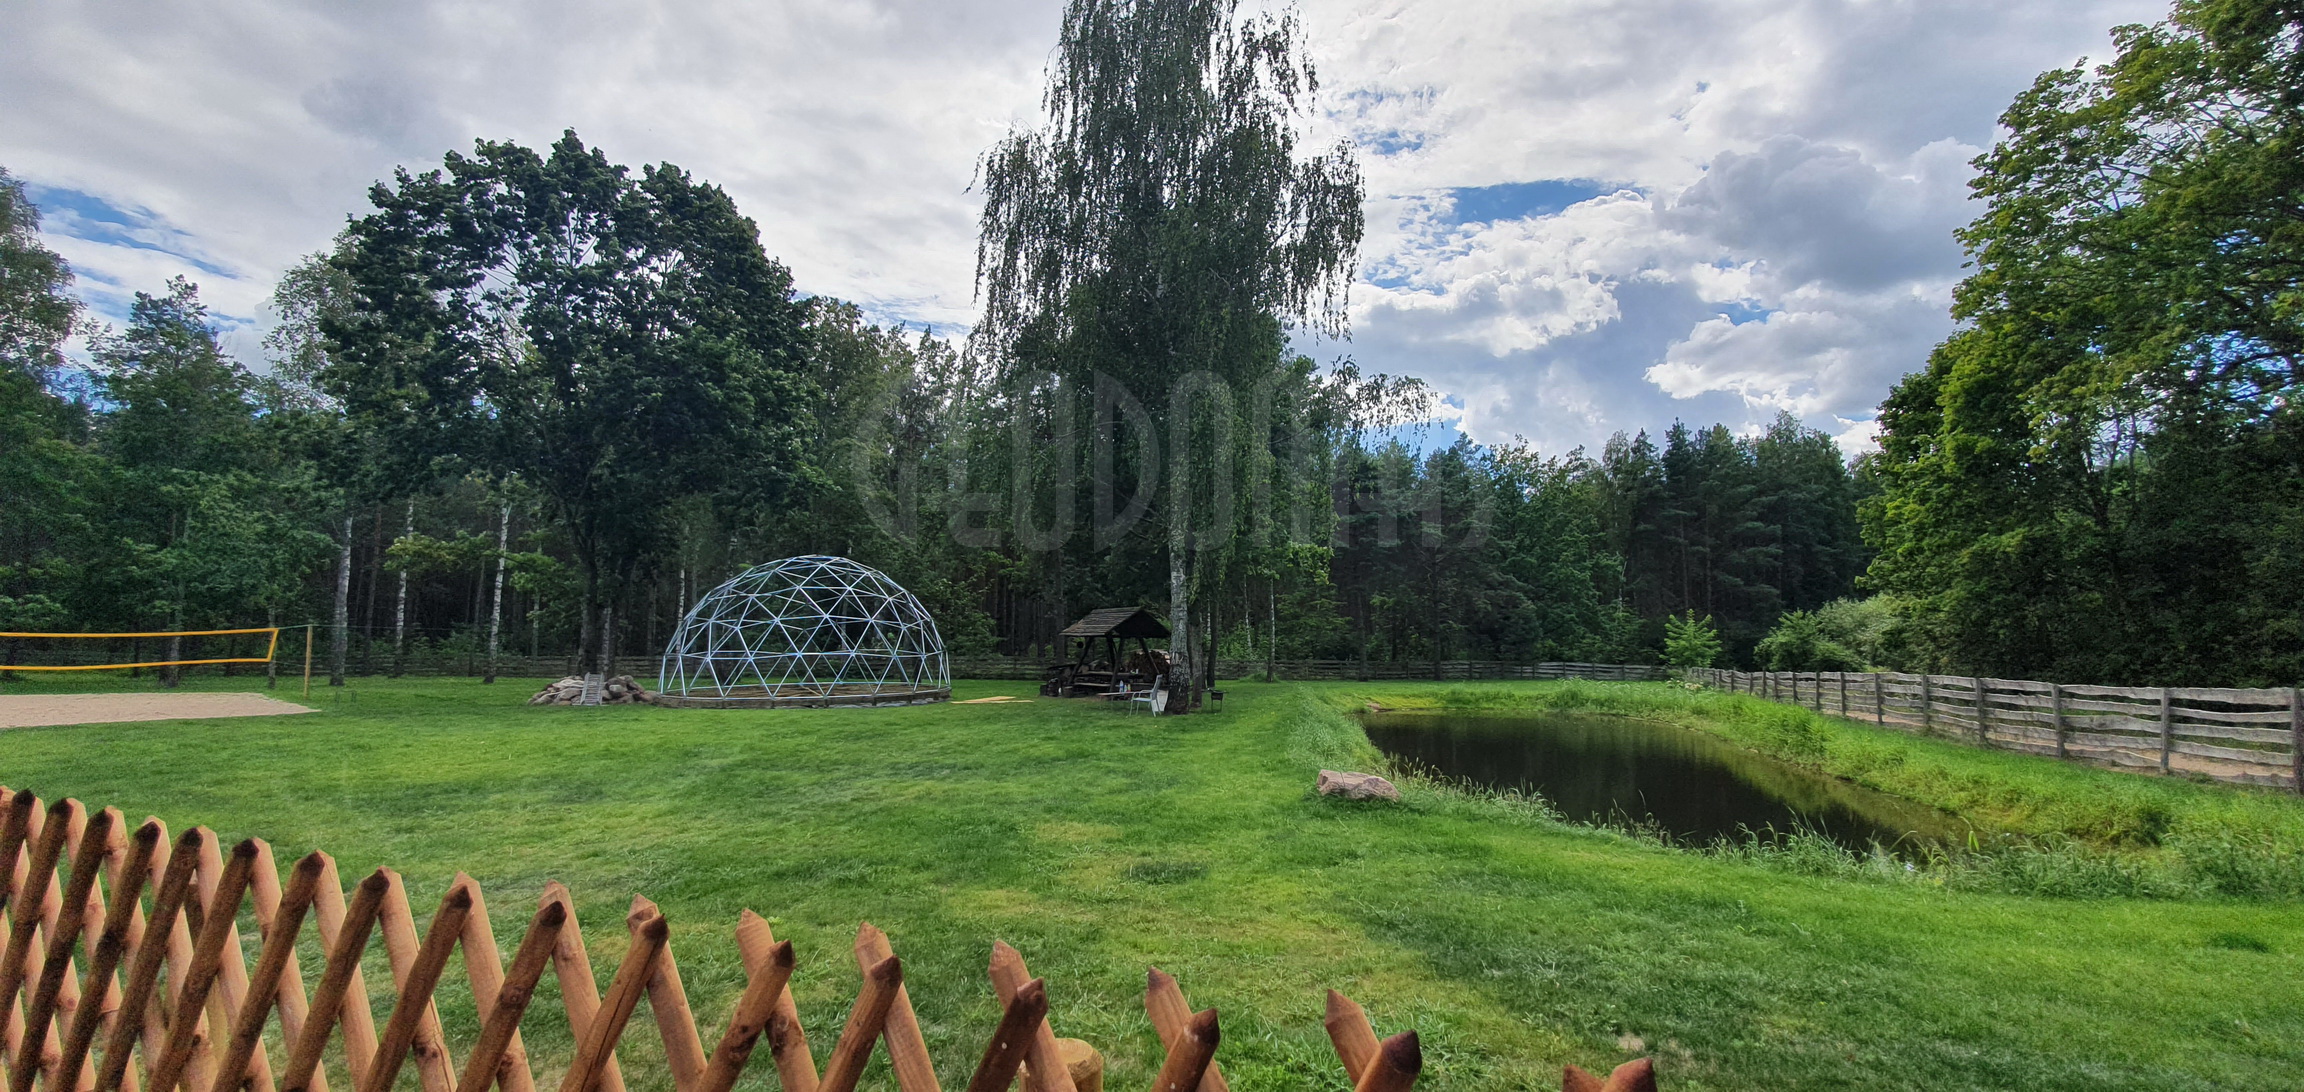 50m² Glamping Dome Ø8m & TREE DOMES | Recreational area